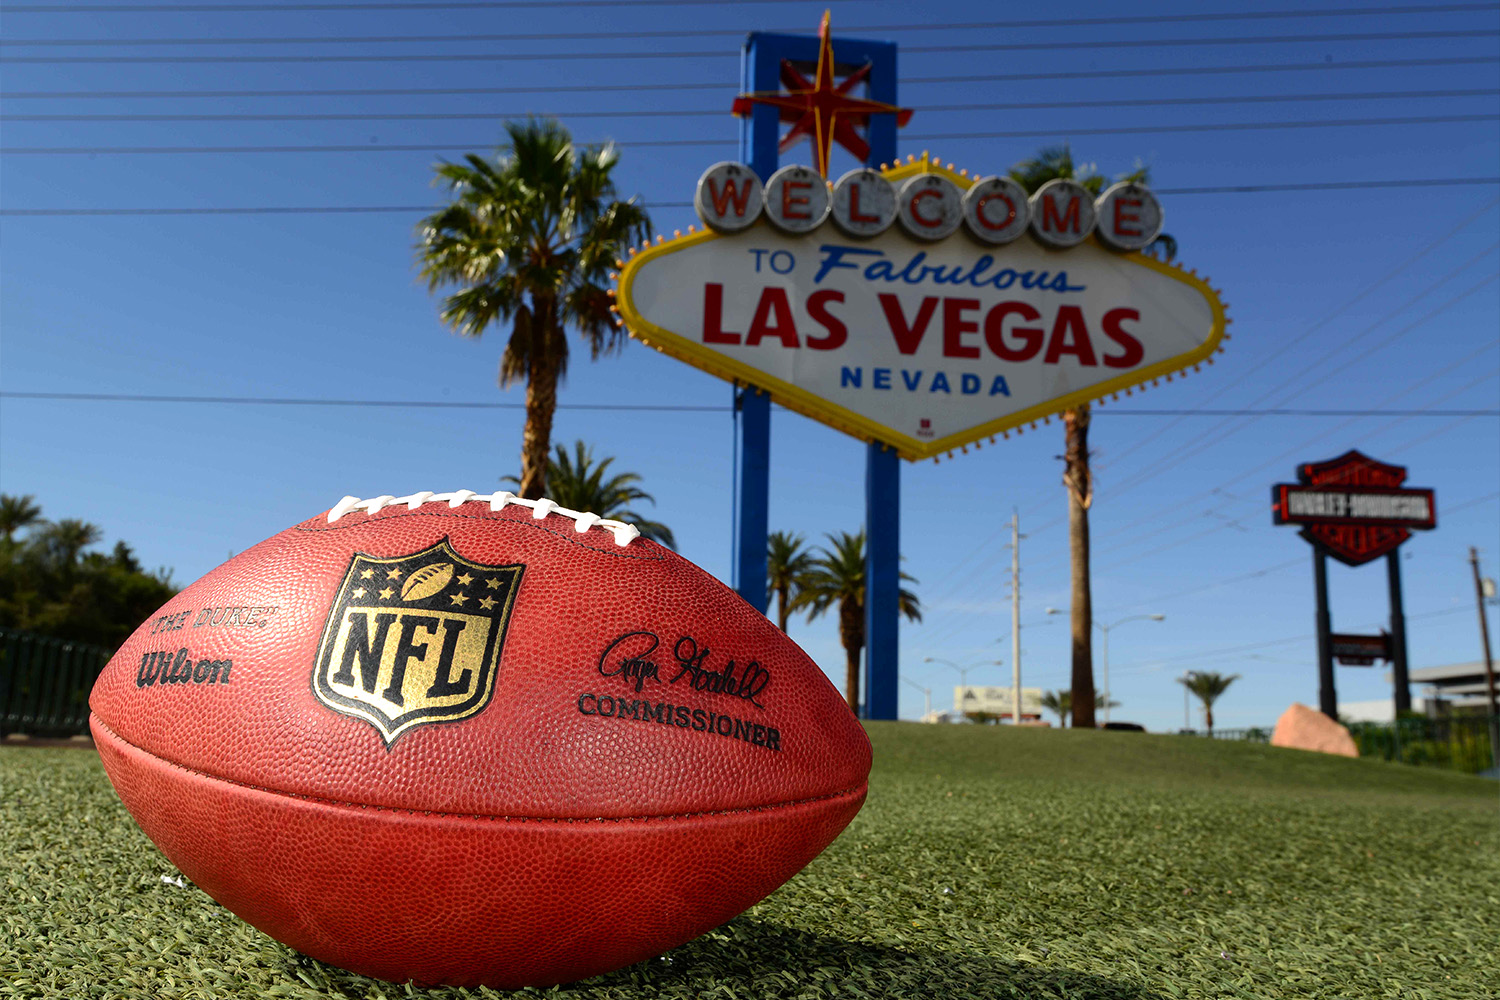 Las Vegas Betting On High Turnout for the NFL Draft